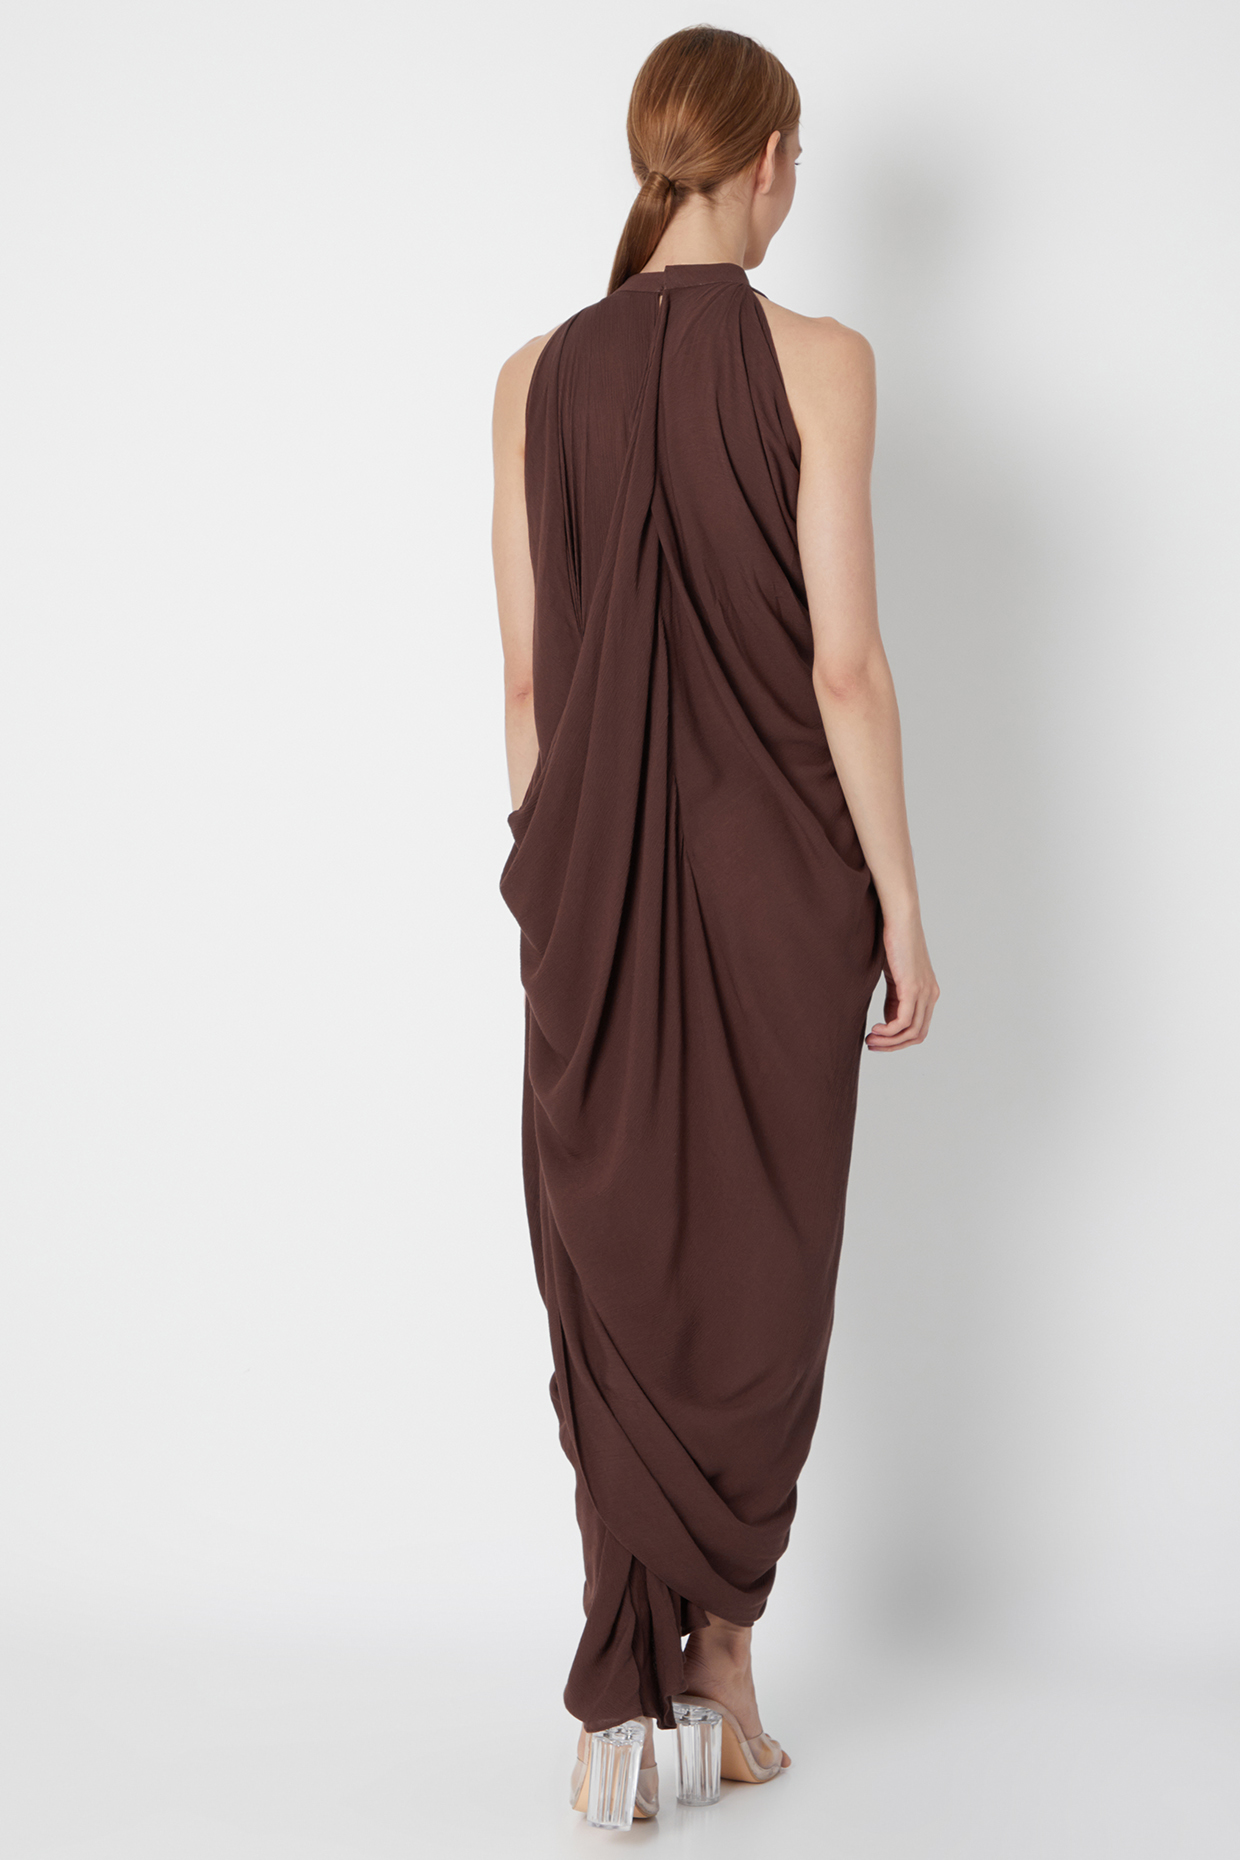 Brown Draped Dress With In-Cut Collar